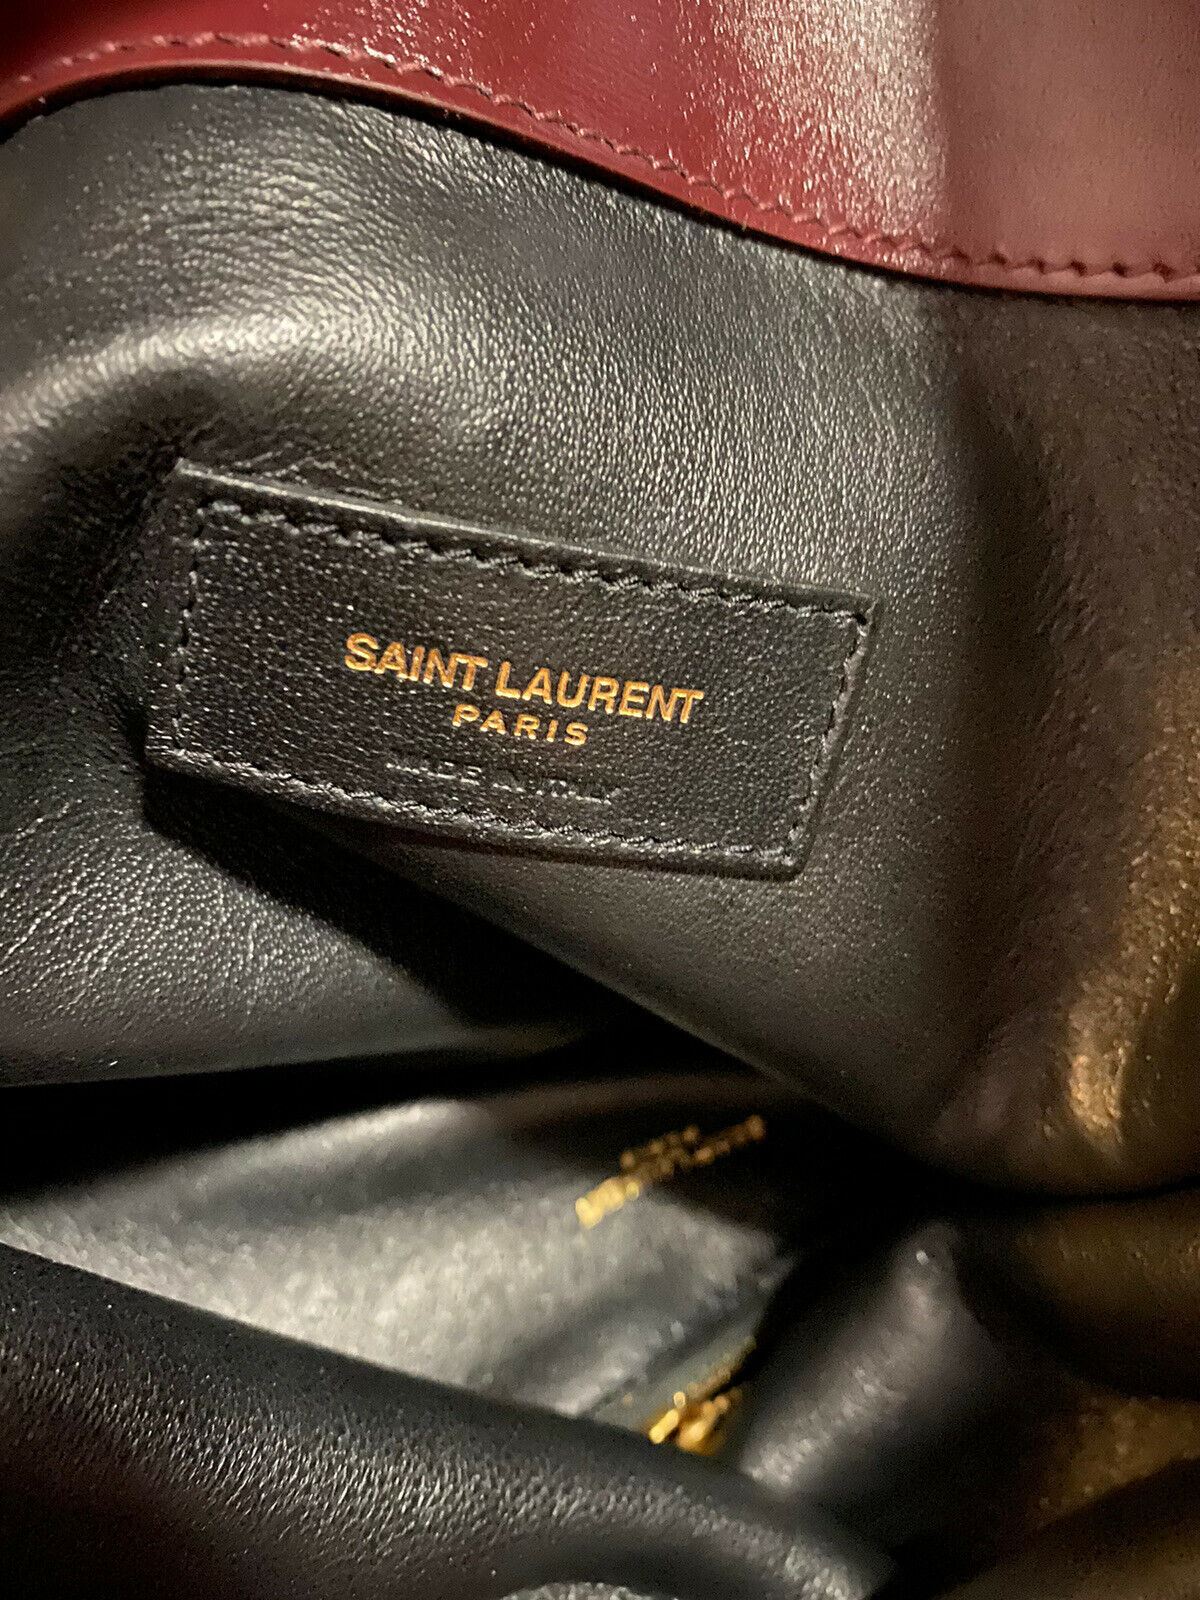 New $2250 Saint Laurent YSL Leather/Suede Top Handle Tote Bag Burgundy Italy